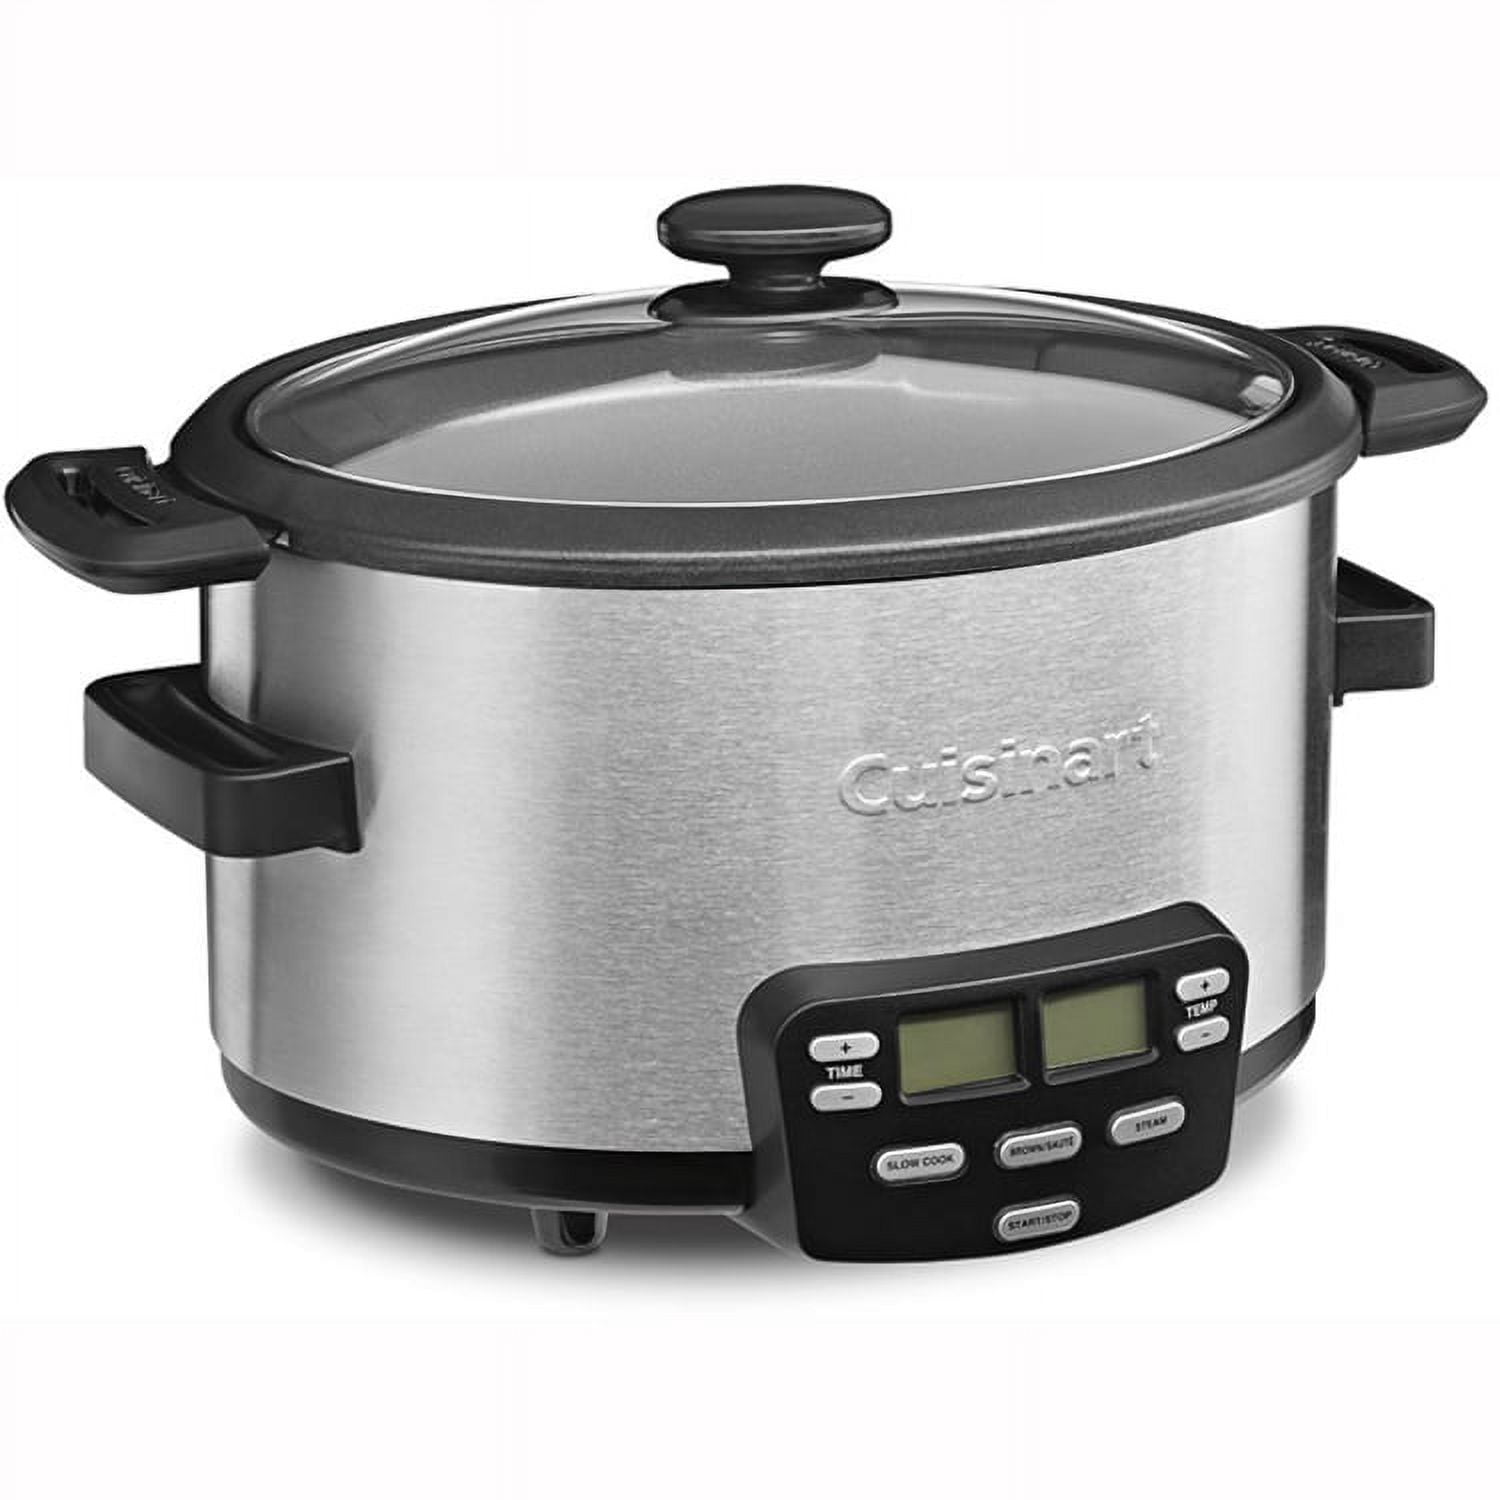 Cuisinart Cook Central 6 Qt. Stainless Steel Electric Multi-Cooker